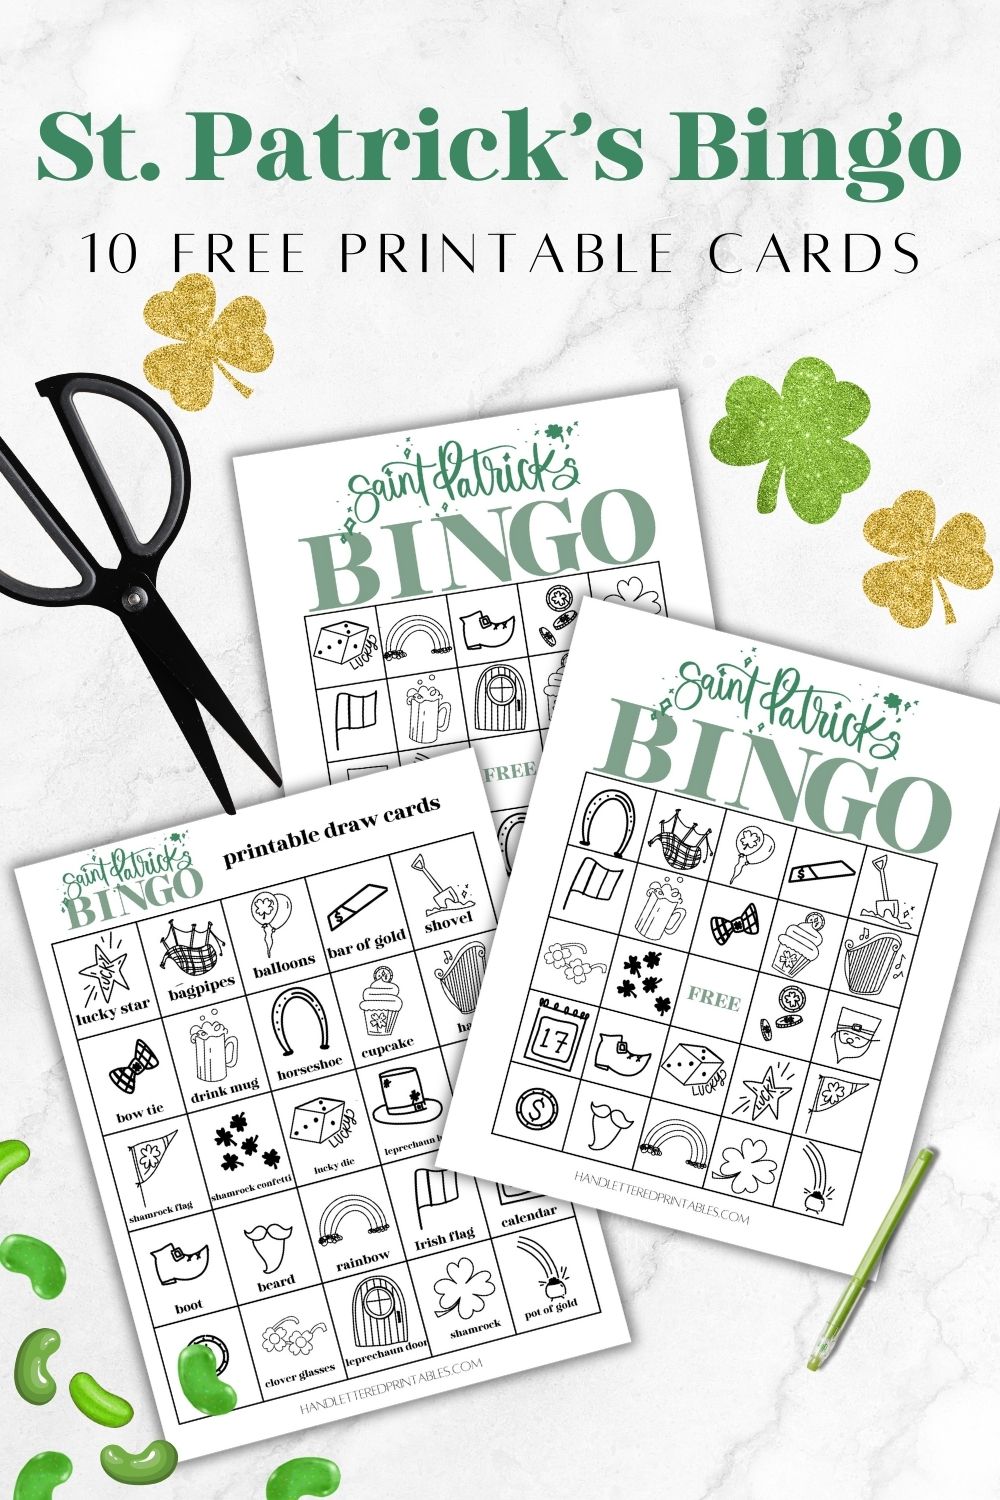 image of two printed saint patrick's day bingo cards with 1 printed saint patricks day bingo calling cards ready to be cut out on marble counter styled with black scissors and glittery shamrocks text over reads: ST PATRICK'S BINGO- 10 free printable cards